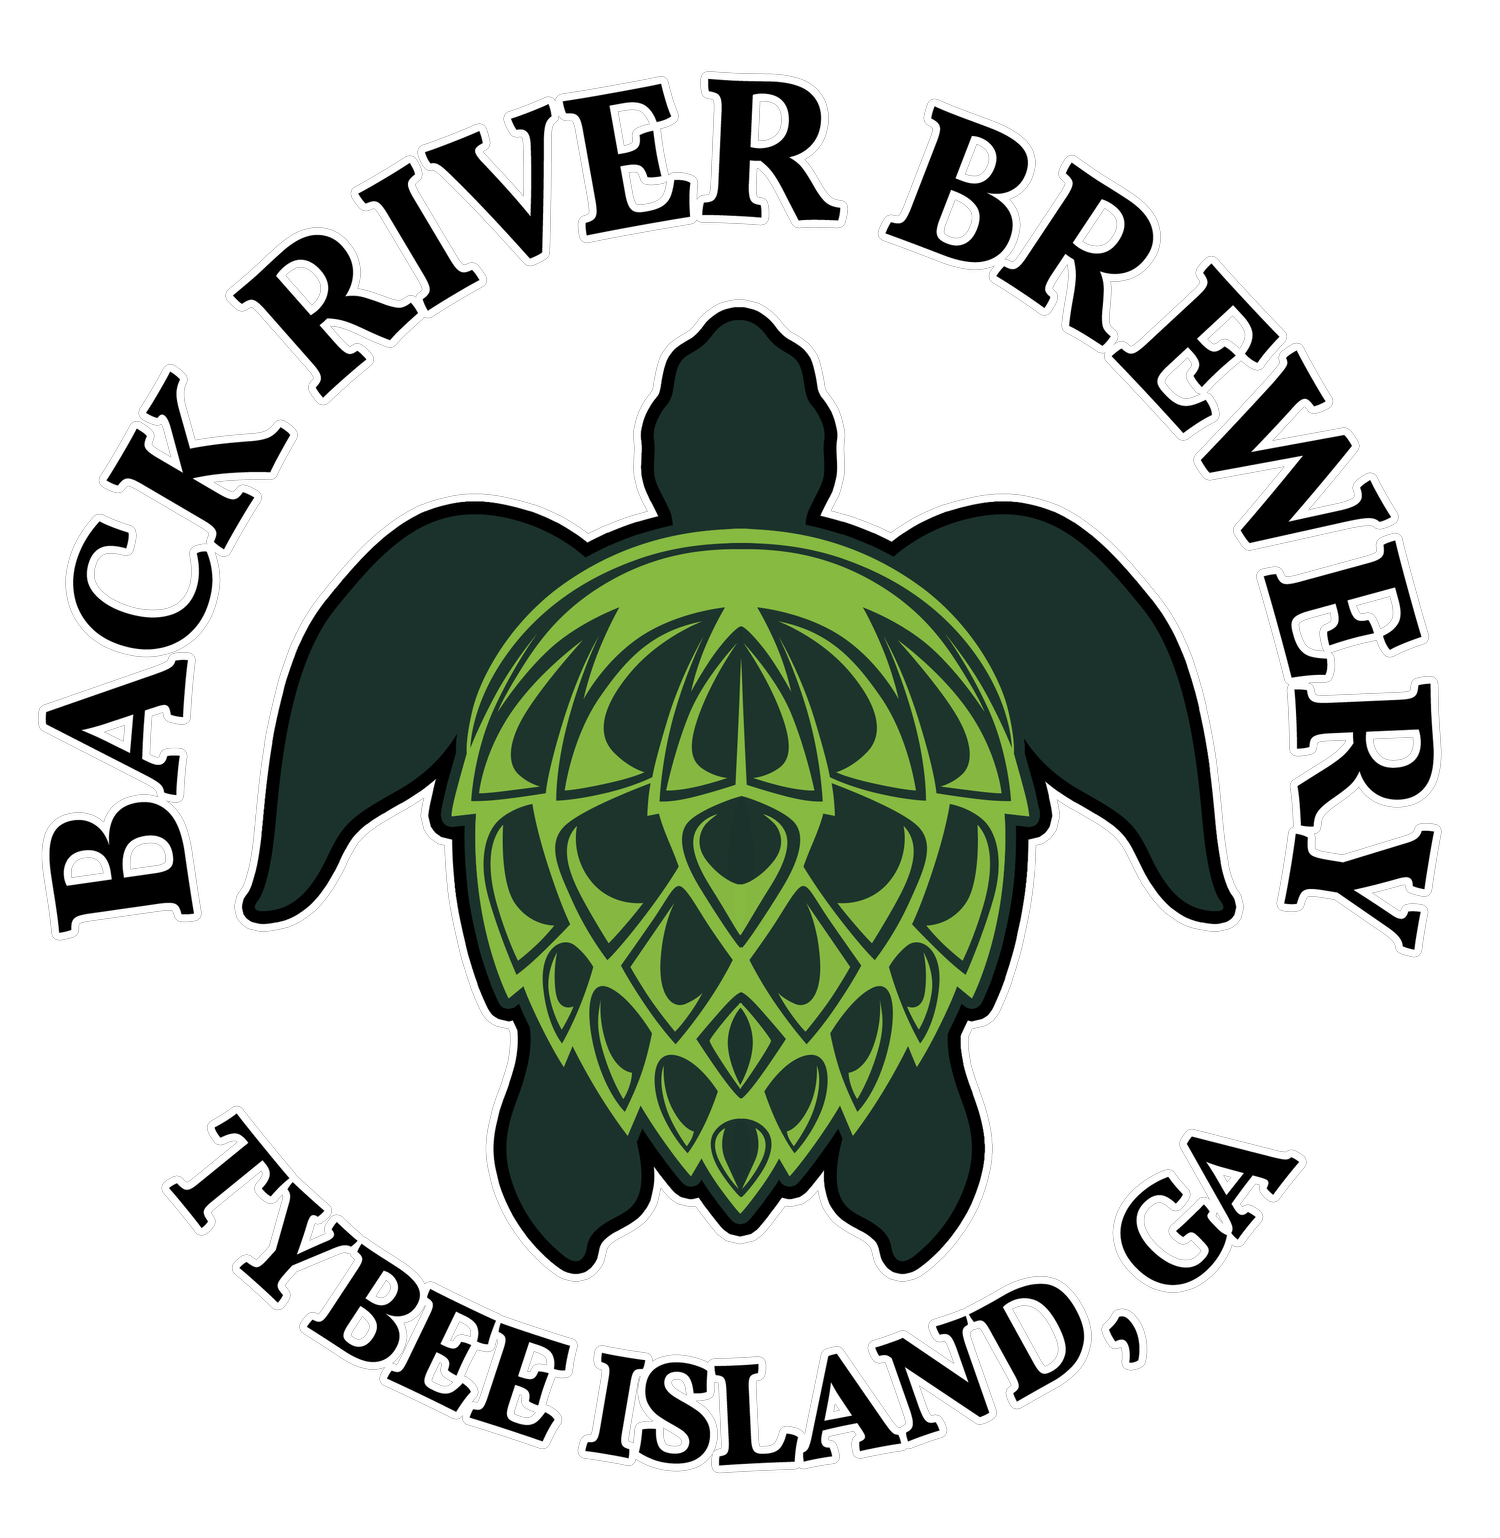 Back River Brewery